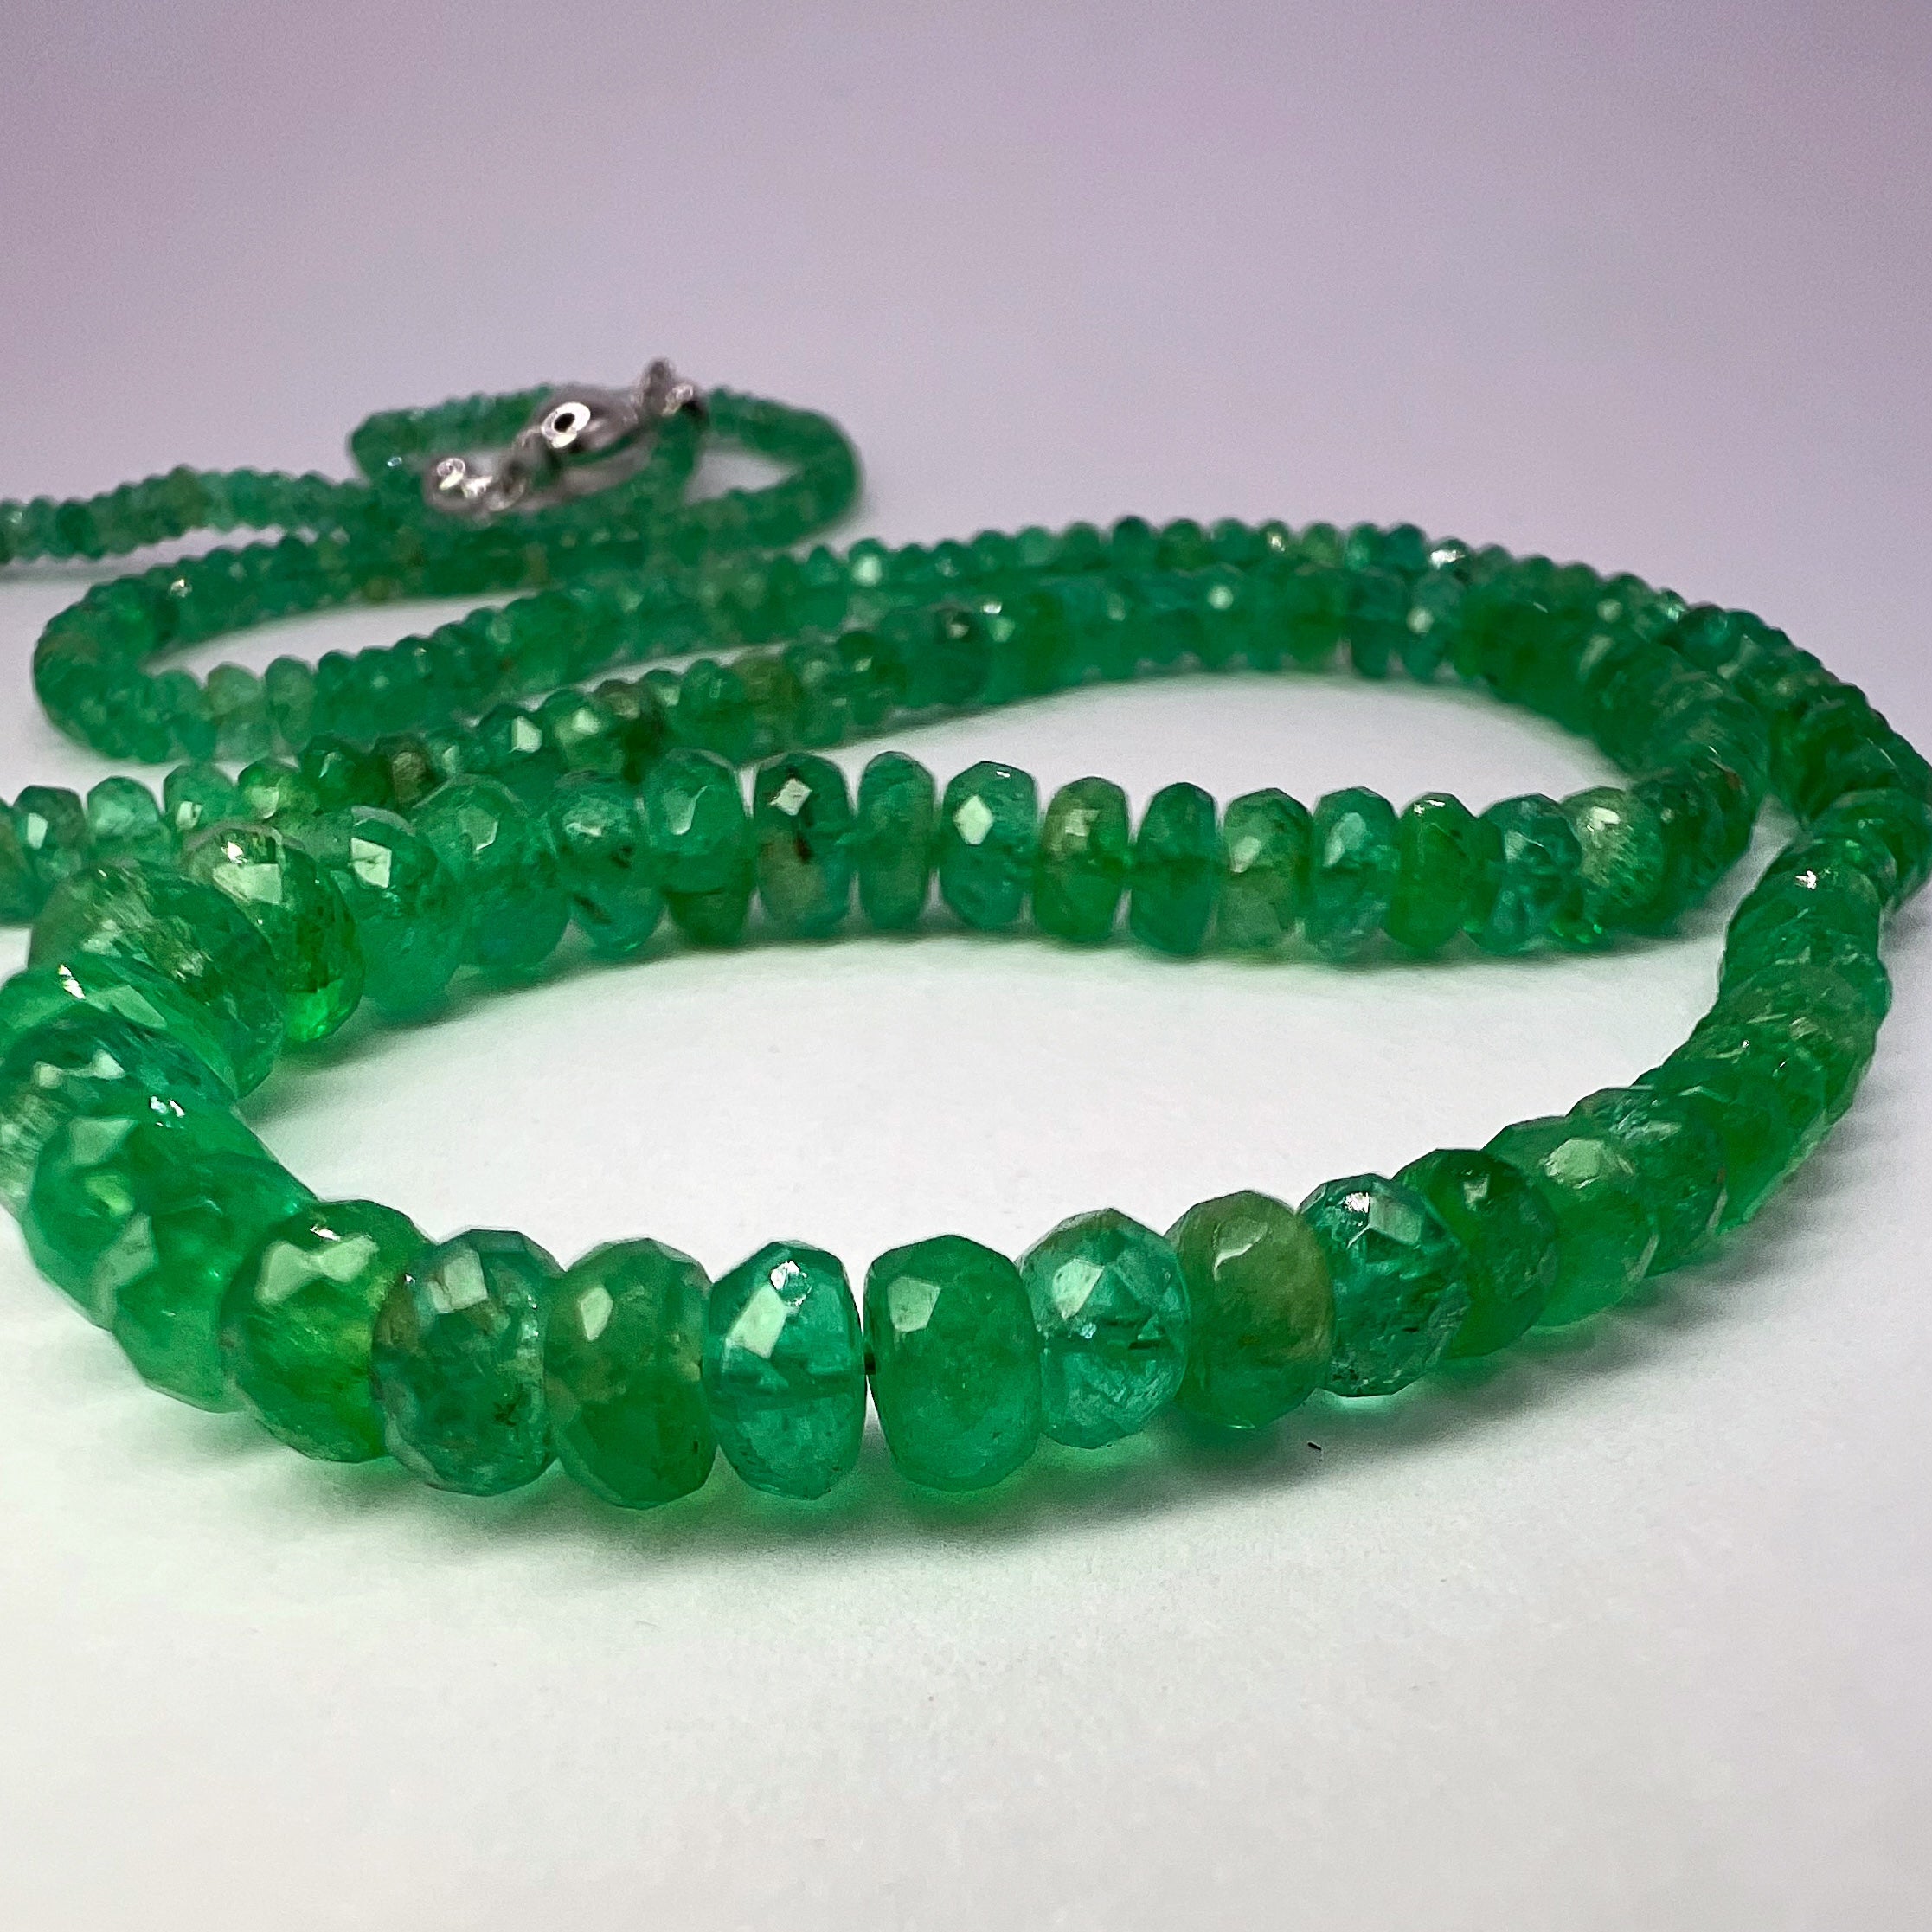 Natural 56.00ct Emerald Briolet Beaded Necklace